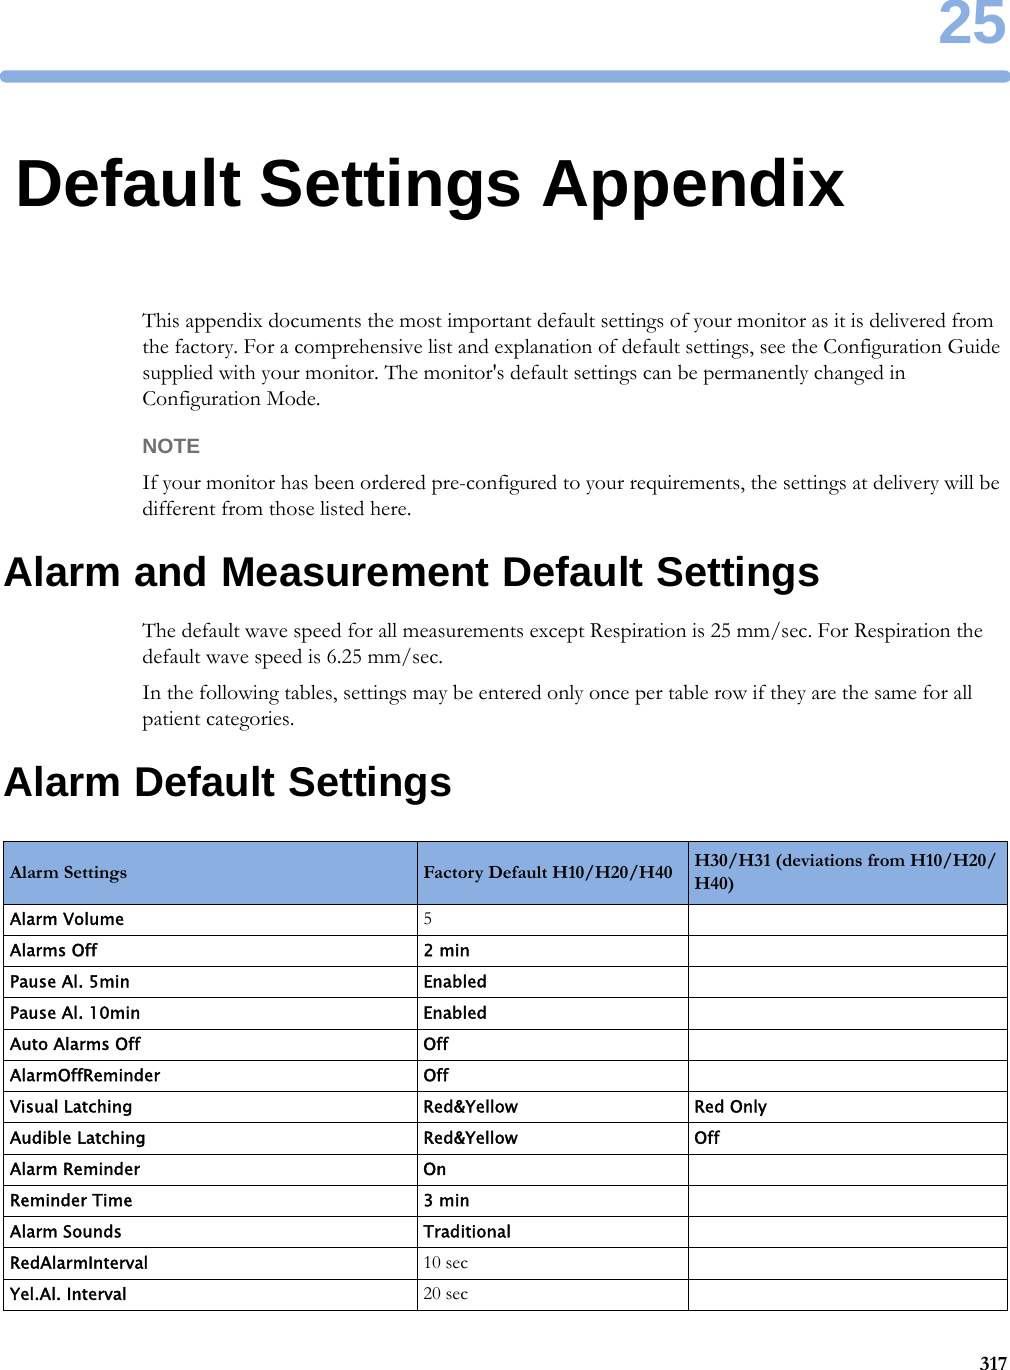 2531725Default Settings AppendixThis appendix documents the most important default settings of your monitor as it is delivered from the factory. For a comprehensive list and explanation of default settings, see the Configuration Guide supplied with your monitor. The monitor&apos;s default settings can be permanently changed in Configuration Mode.NOTEIf your monitor has been ordered pre-configured to your requirements, the settings at delivery will be different from those listed here.Alarm and Measurement Default SettingsThe default wave speed for all measurements except Respiration is 25 mm/sec. For Respiration the default wave speed is 6.25 mm/sec.In the following tables, settings may be entered only once per table row if they are the same for all patient categories.Alarm Default SettingsAlarm Settings Factory Default H10/H20/H40 H30/H31 (deviations from H10/H20/H40)Alarm Volume 5Alarms Off 2 minPause Al. 5min EnabledPause Al. 10min EnabledAuto Alarms Off OffAlarmOffReminder OffVisual Latching Red&amp;Yellow Red OnlyAudible Latching Red&amp;Yellow OffAlarm Reminder OnReminder Time 3 minAlarm Sounds TraditionalRedAlarmInterval 10 secYel.Al. Interval 20 sec